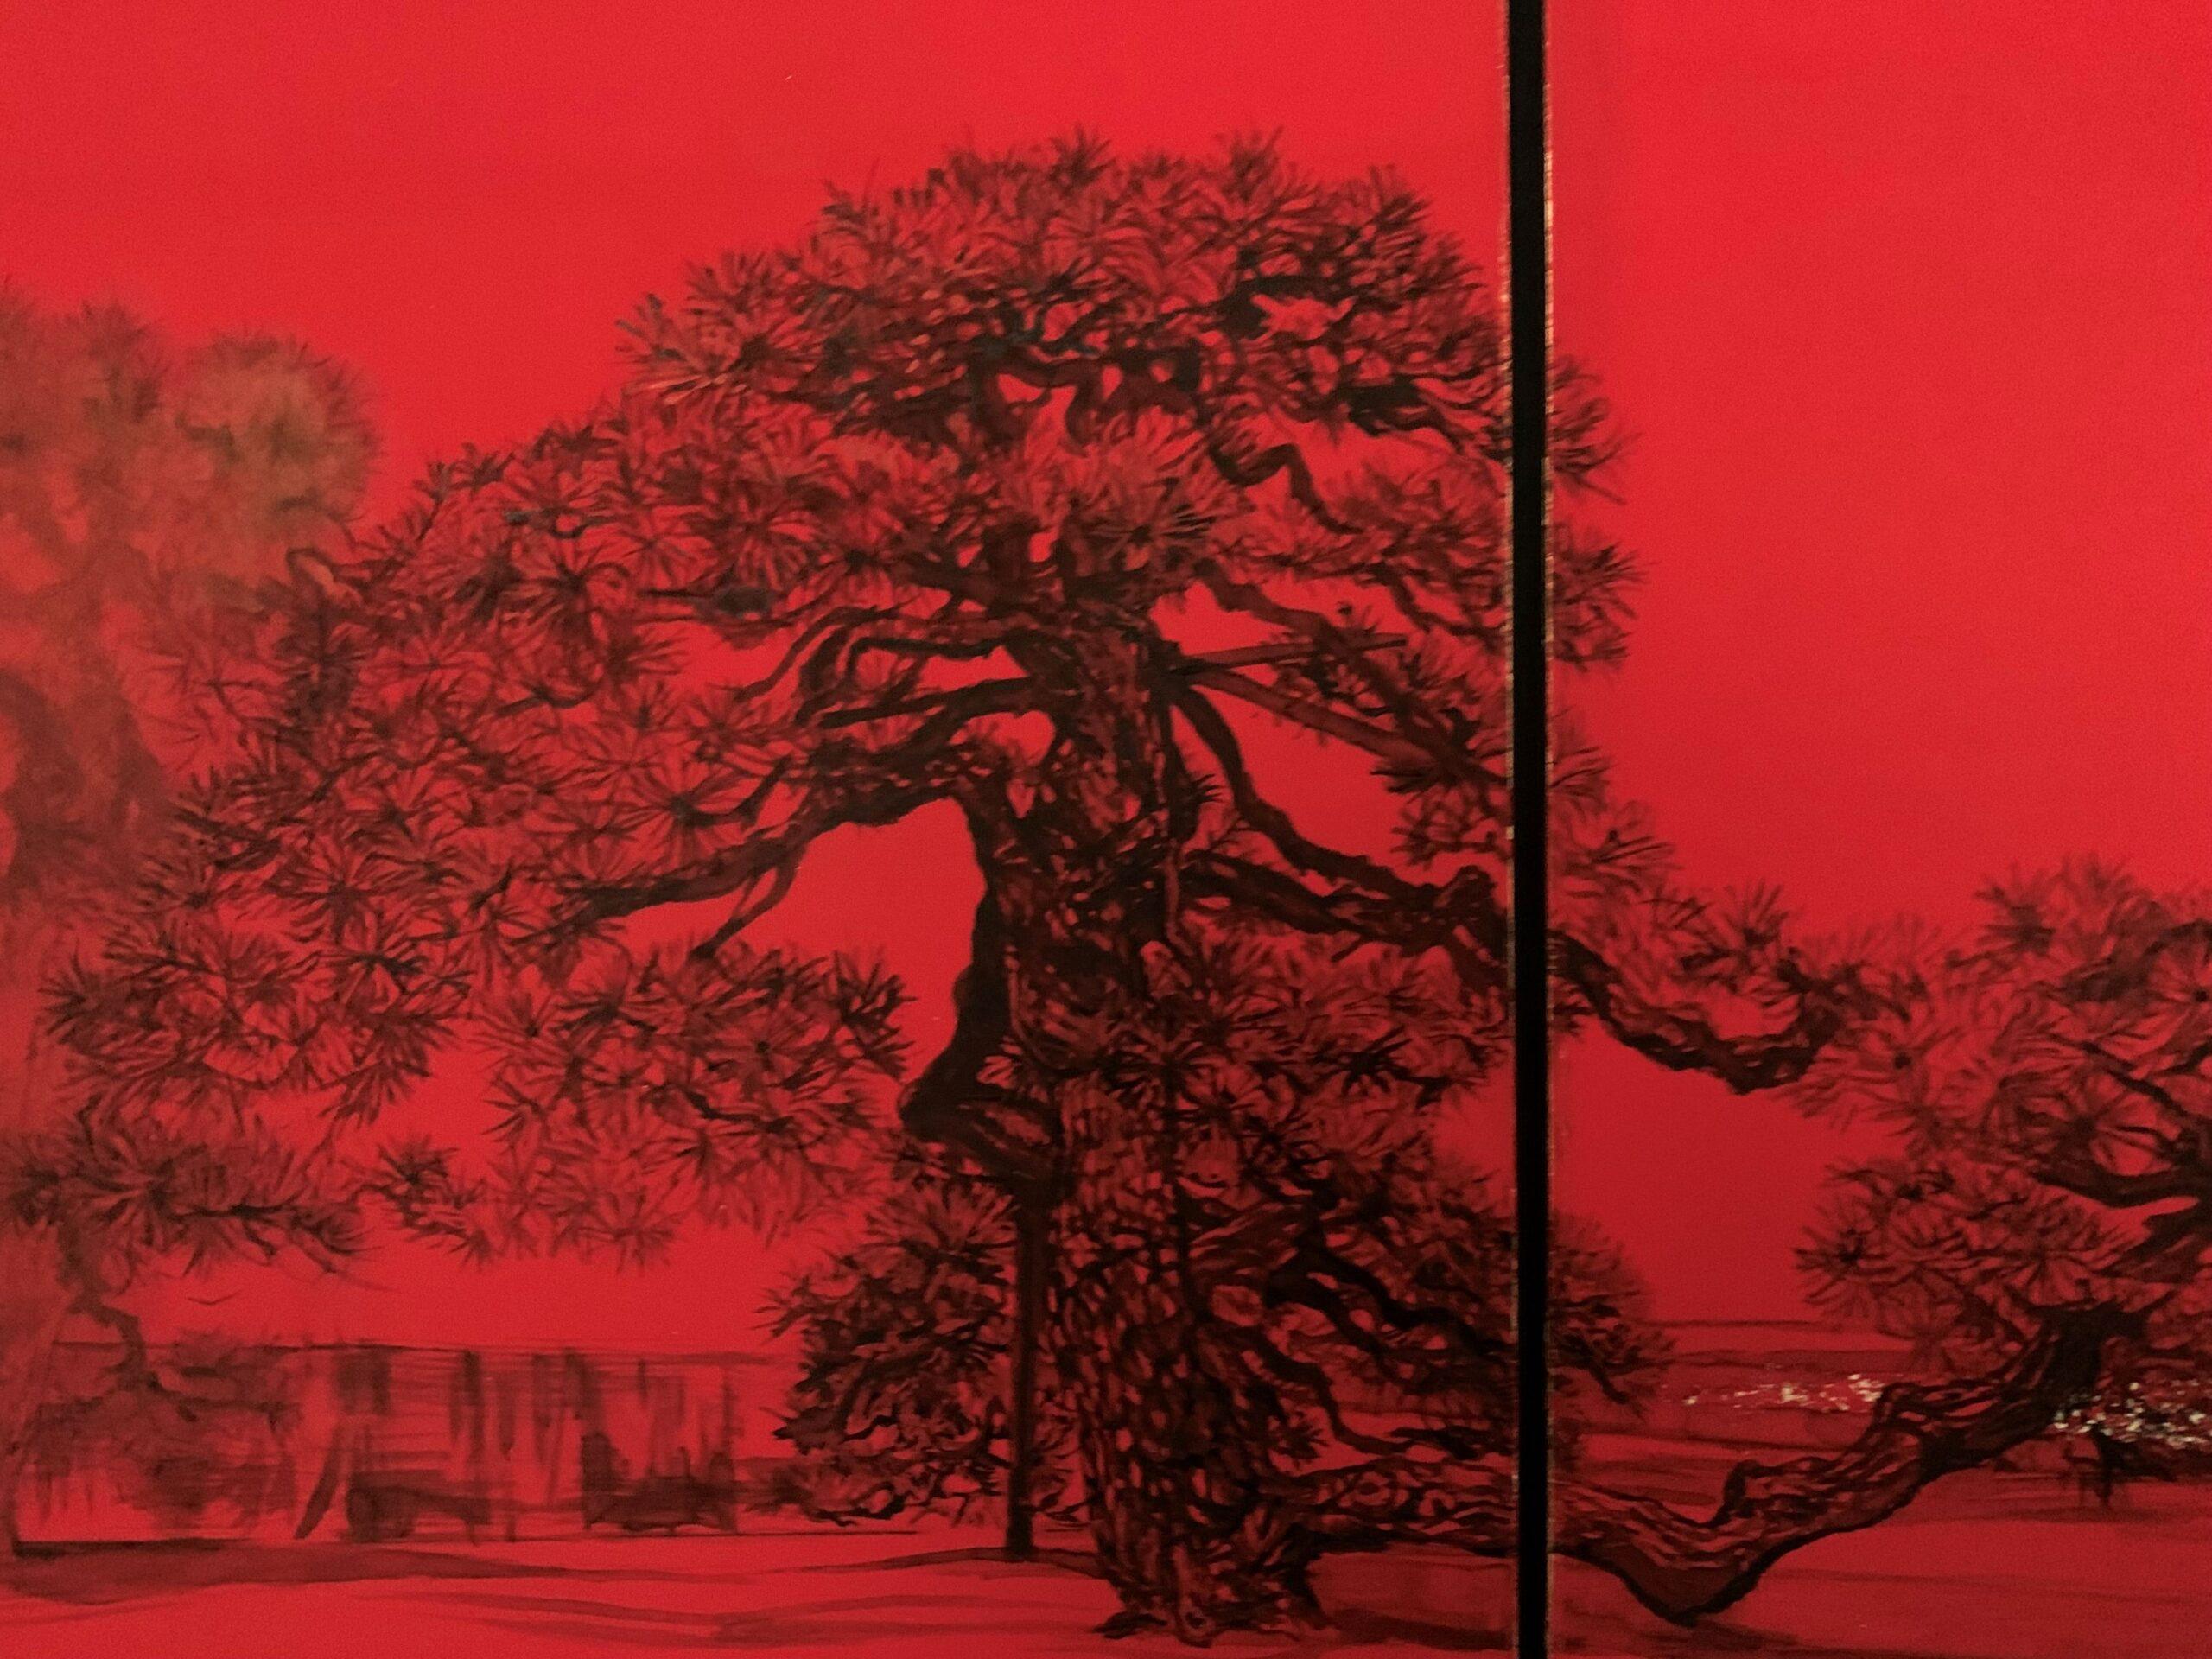 Urban landscape III by Lumi Mizutani - Japanese painting, intense red, trees For Sale 3